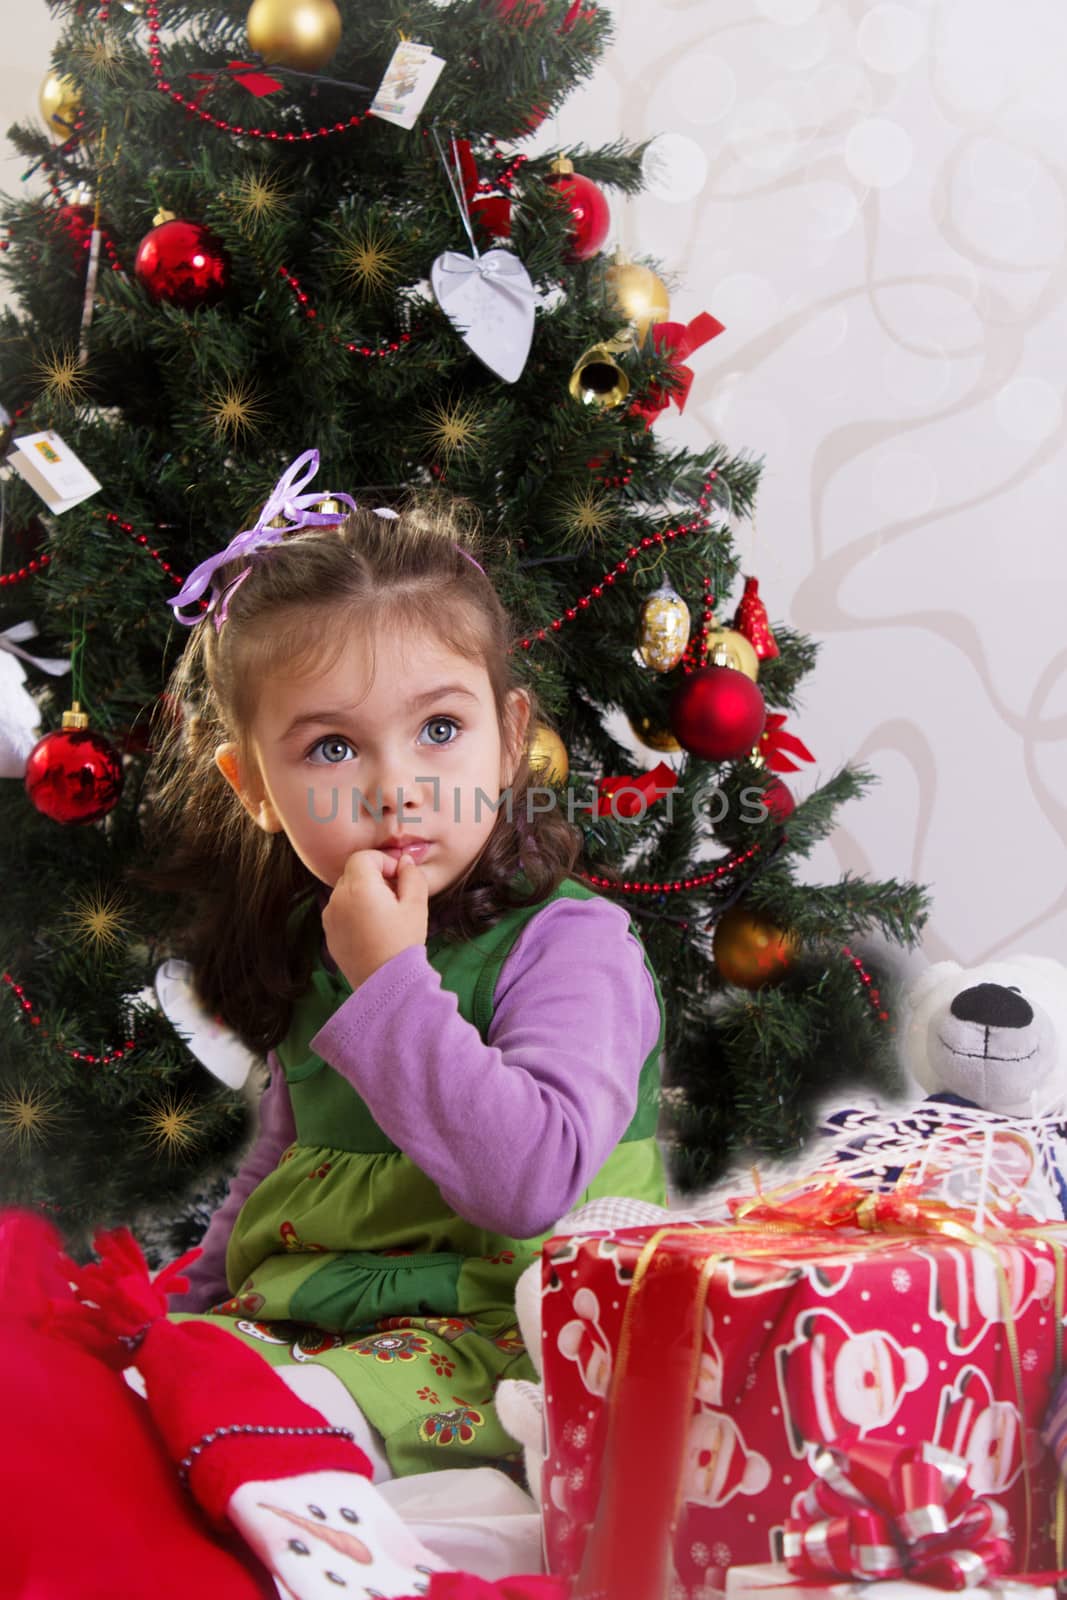 Amazed little girl under Christmas tree with gifts